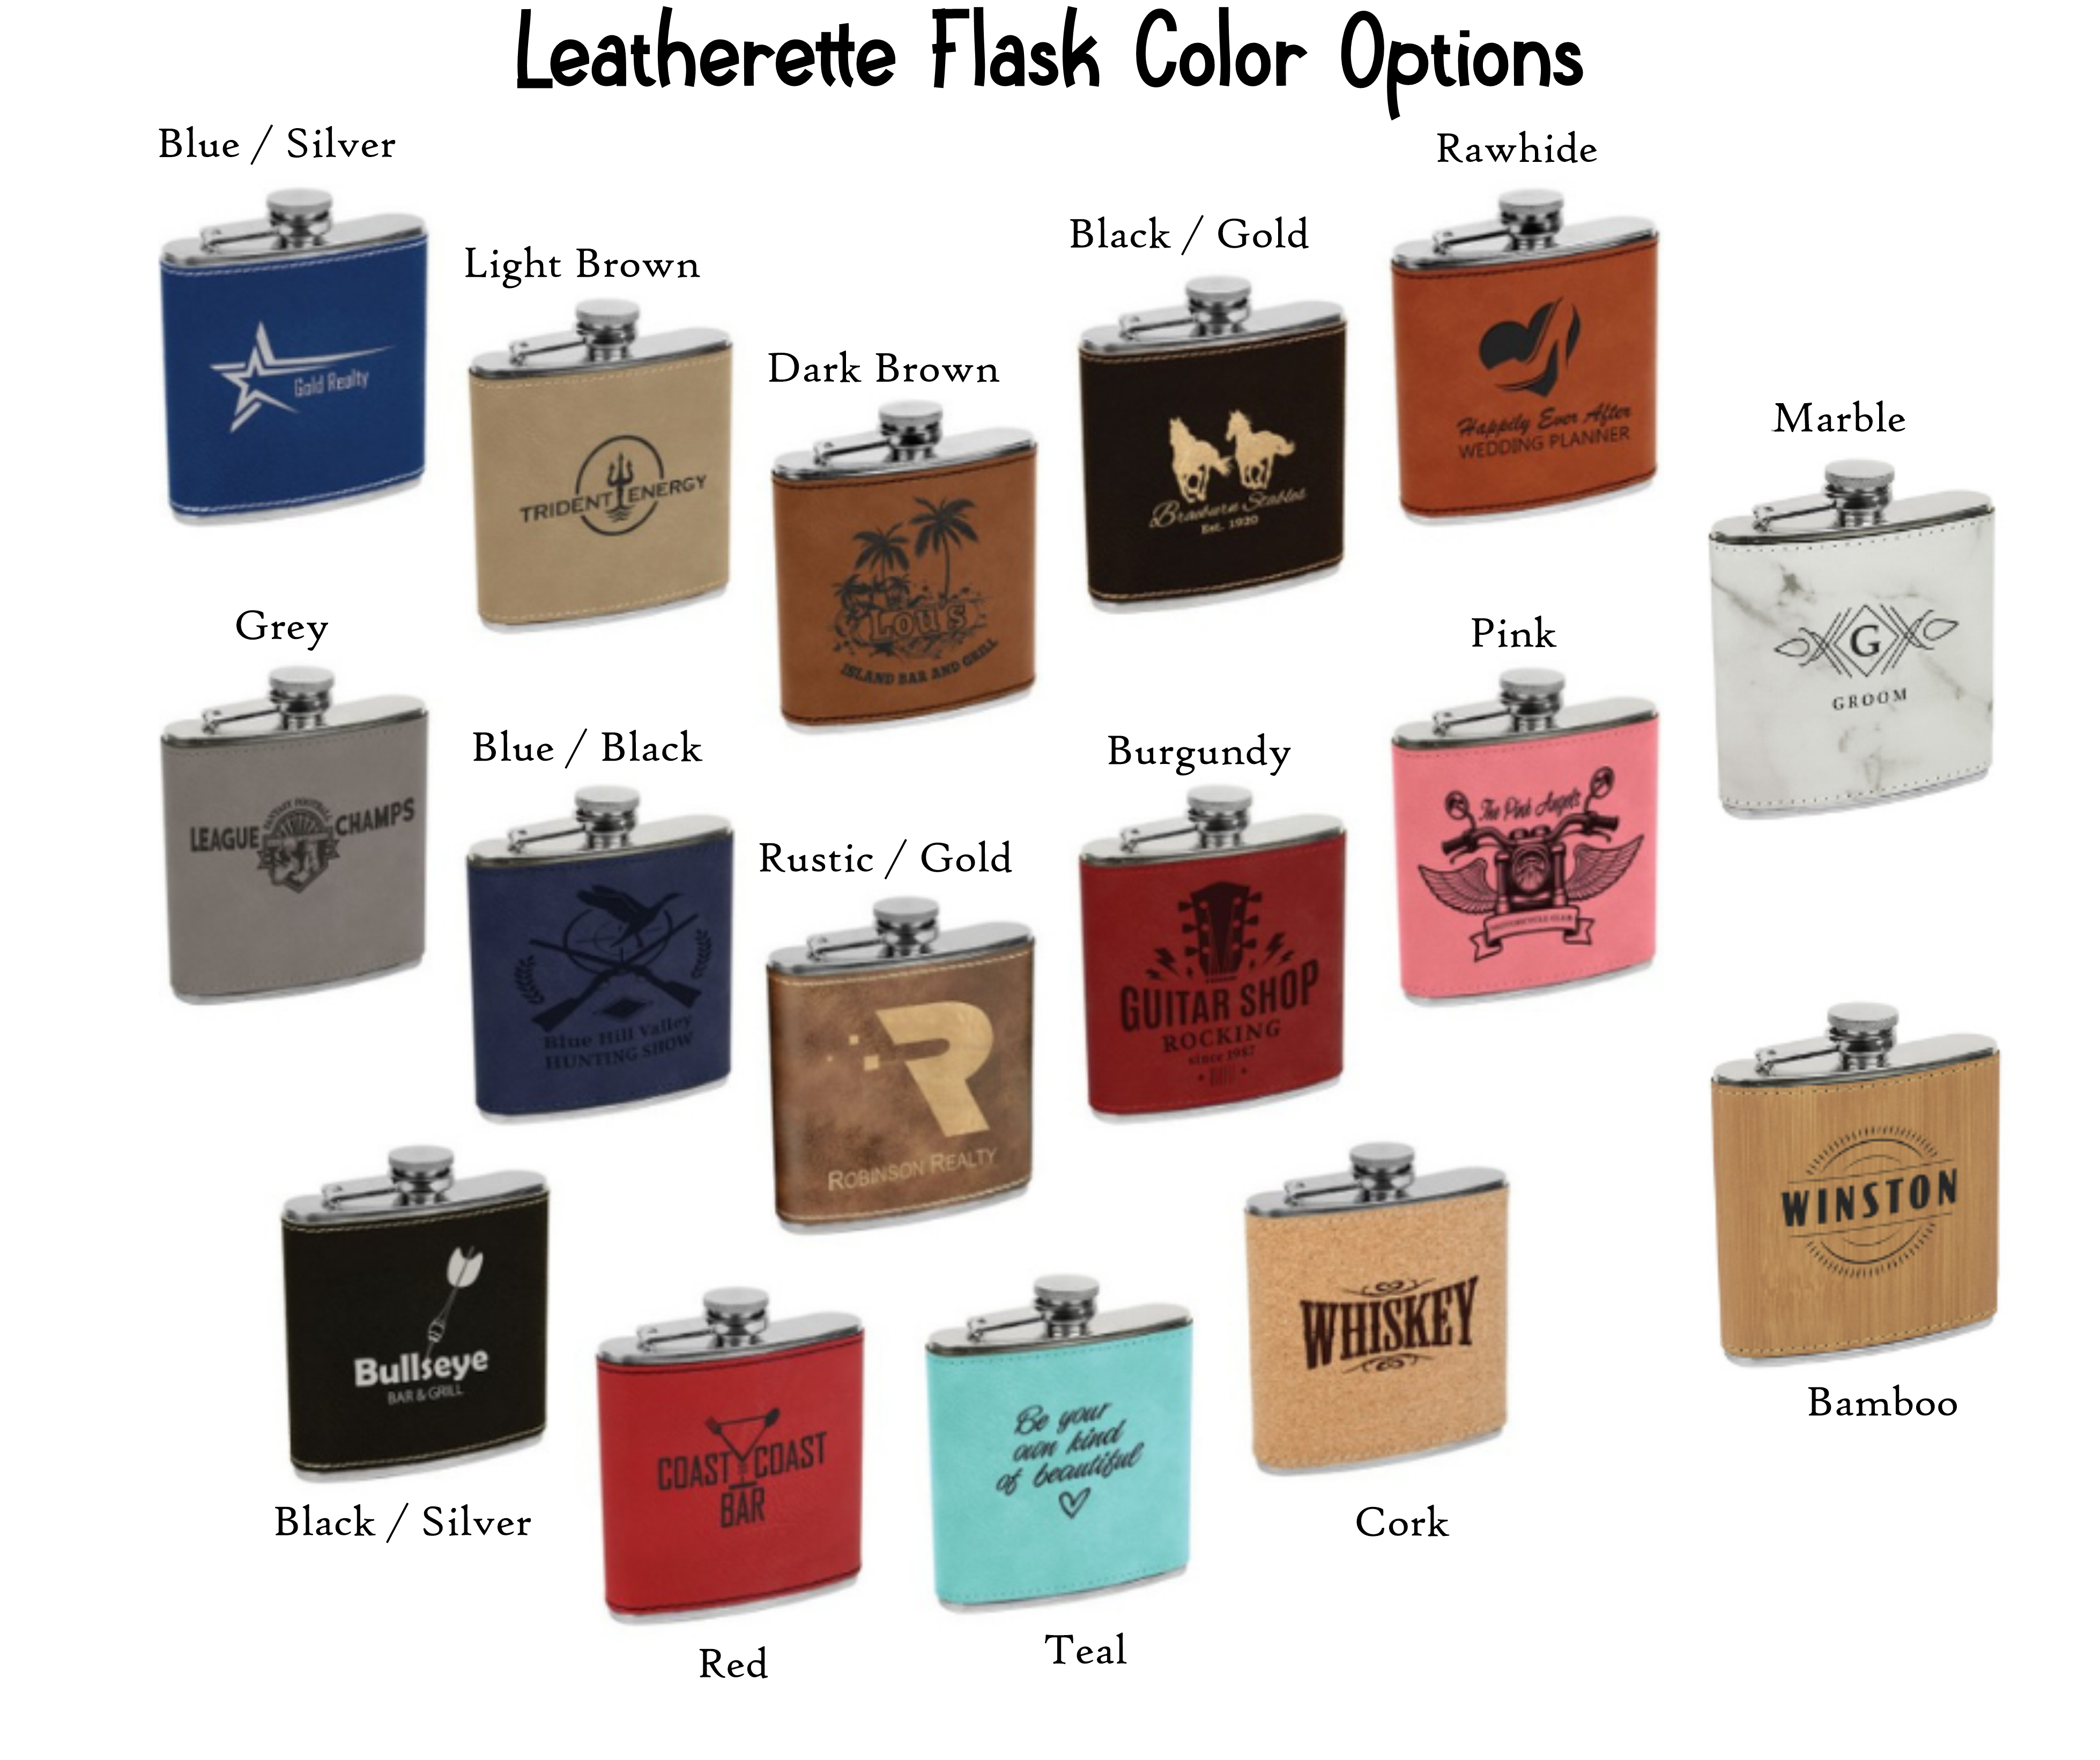 Name w/Initial Wedding Party Flask - Metal or Leatherette